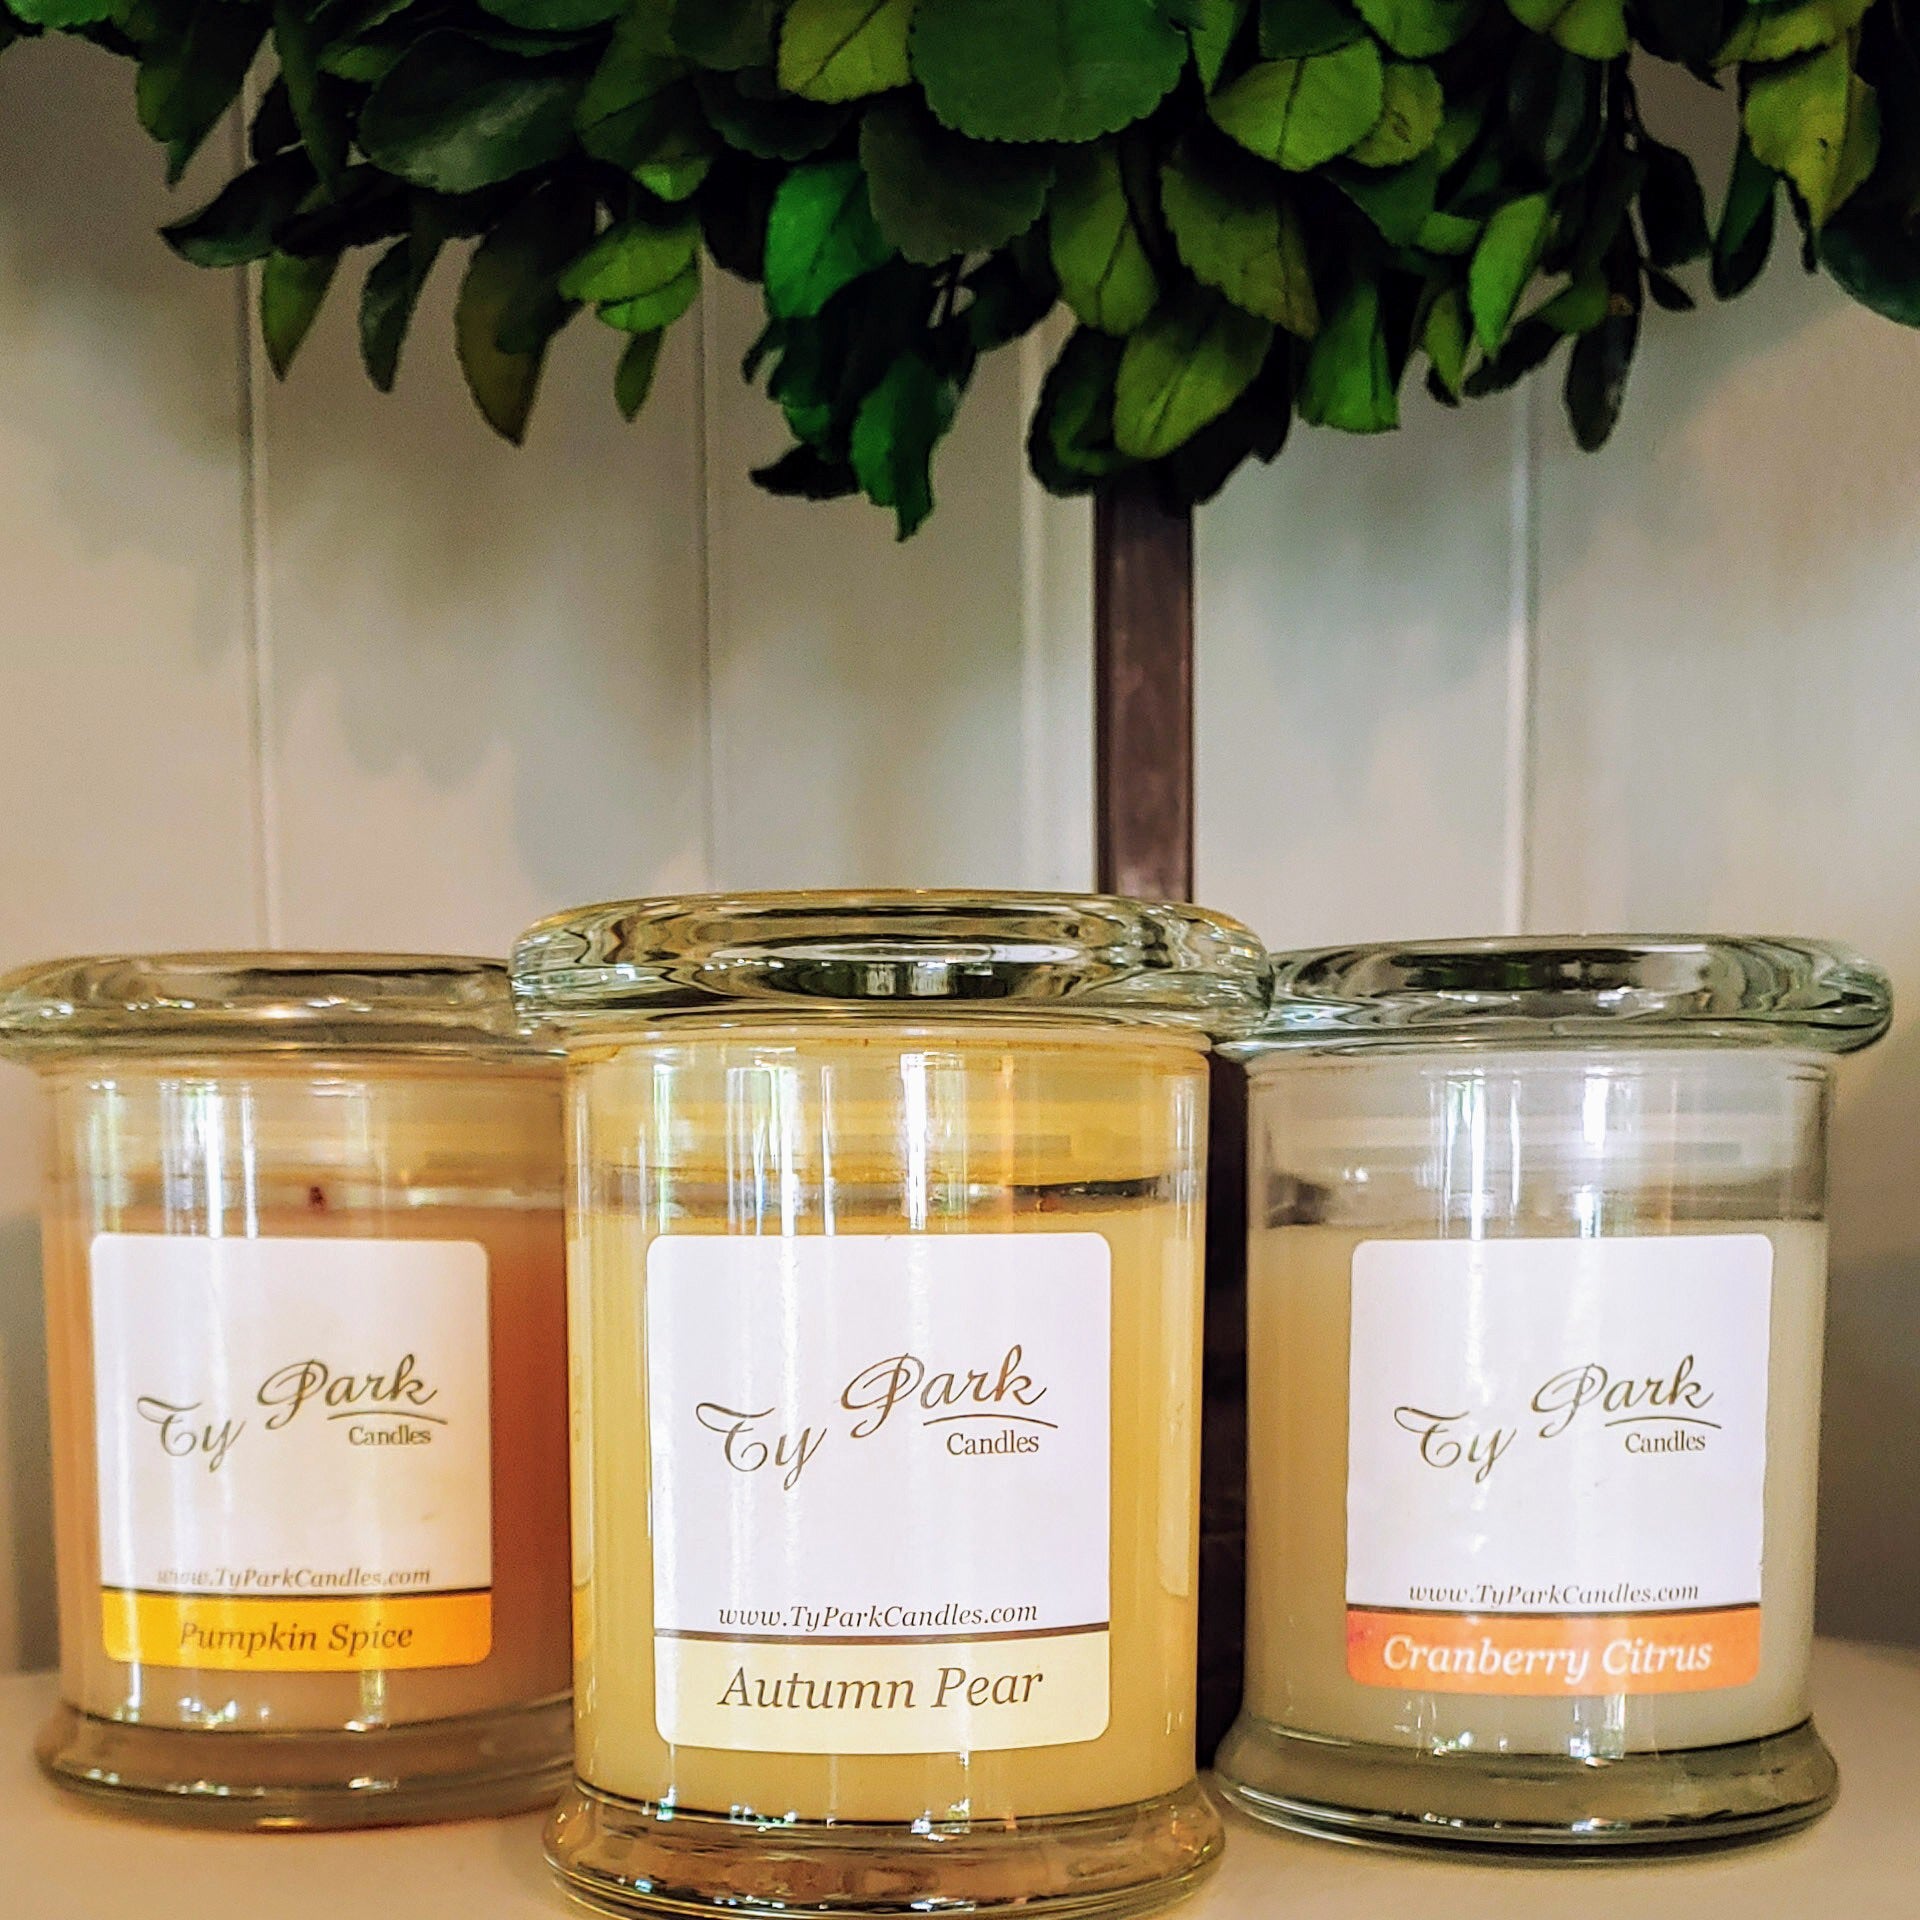 TY Park Candles